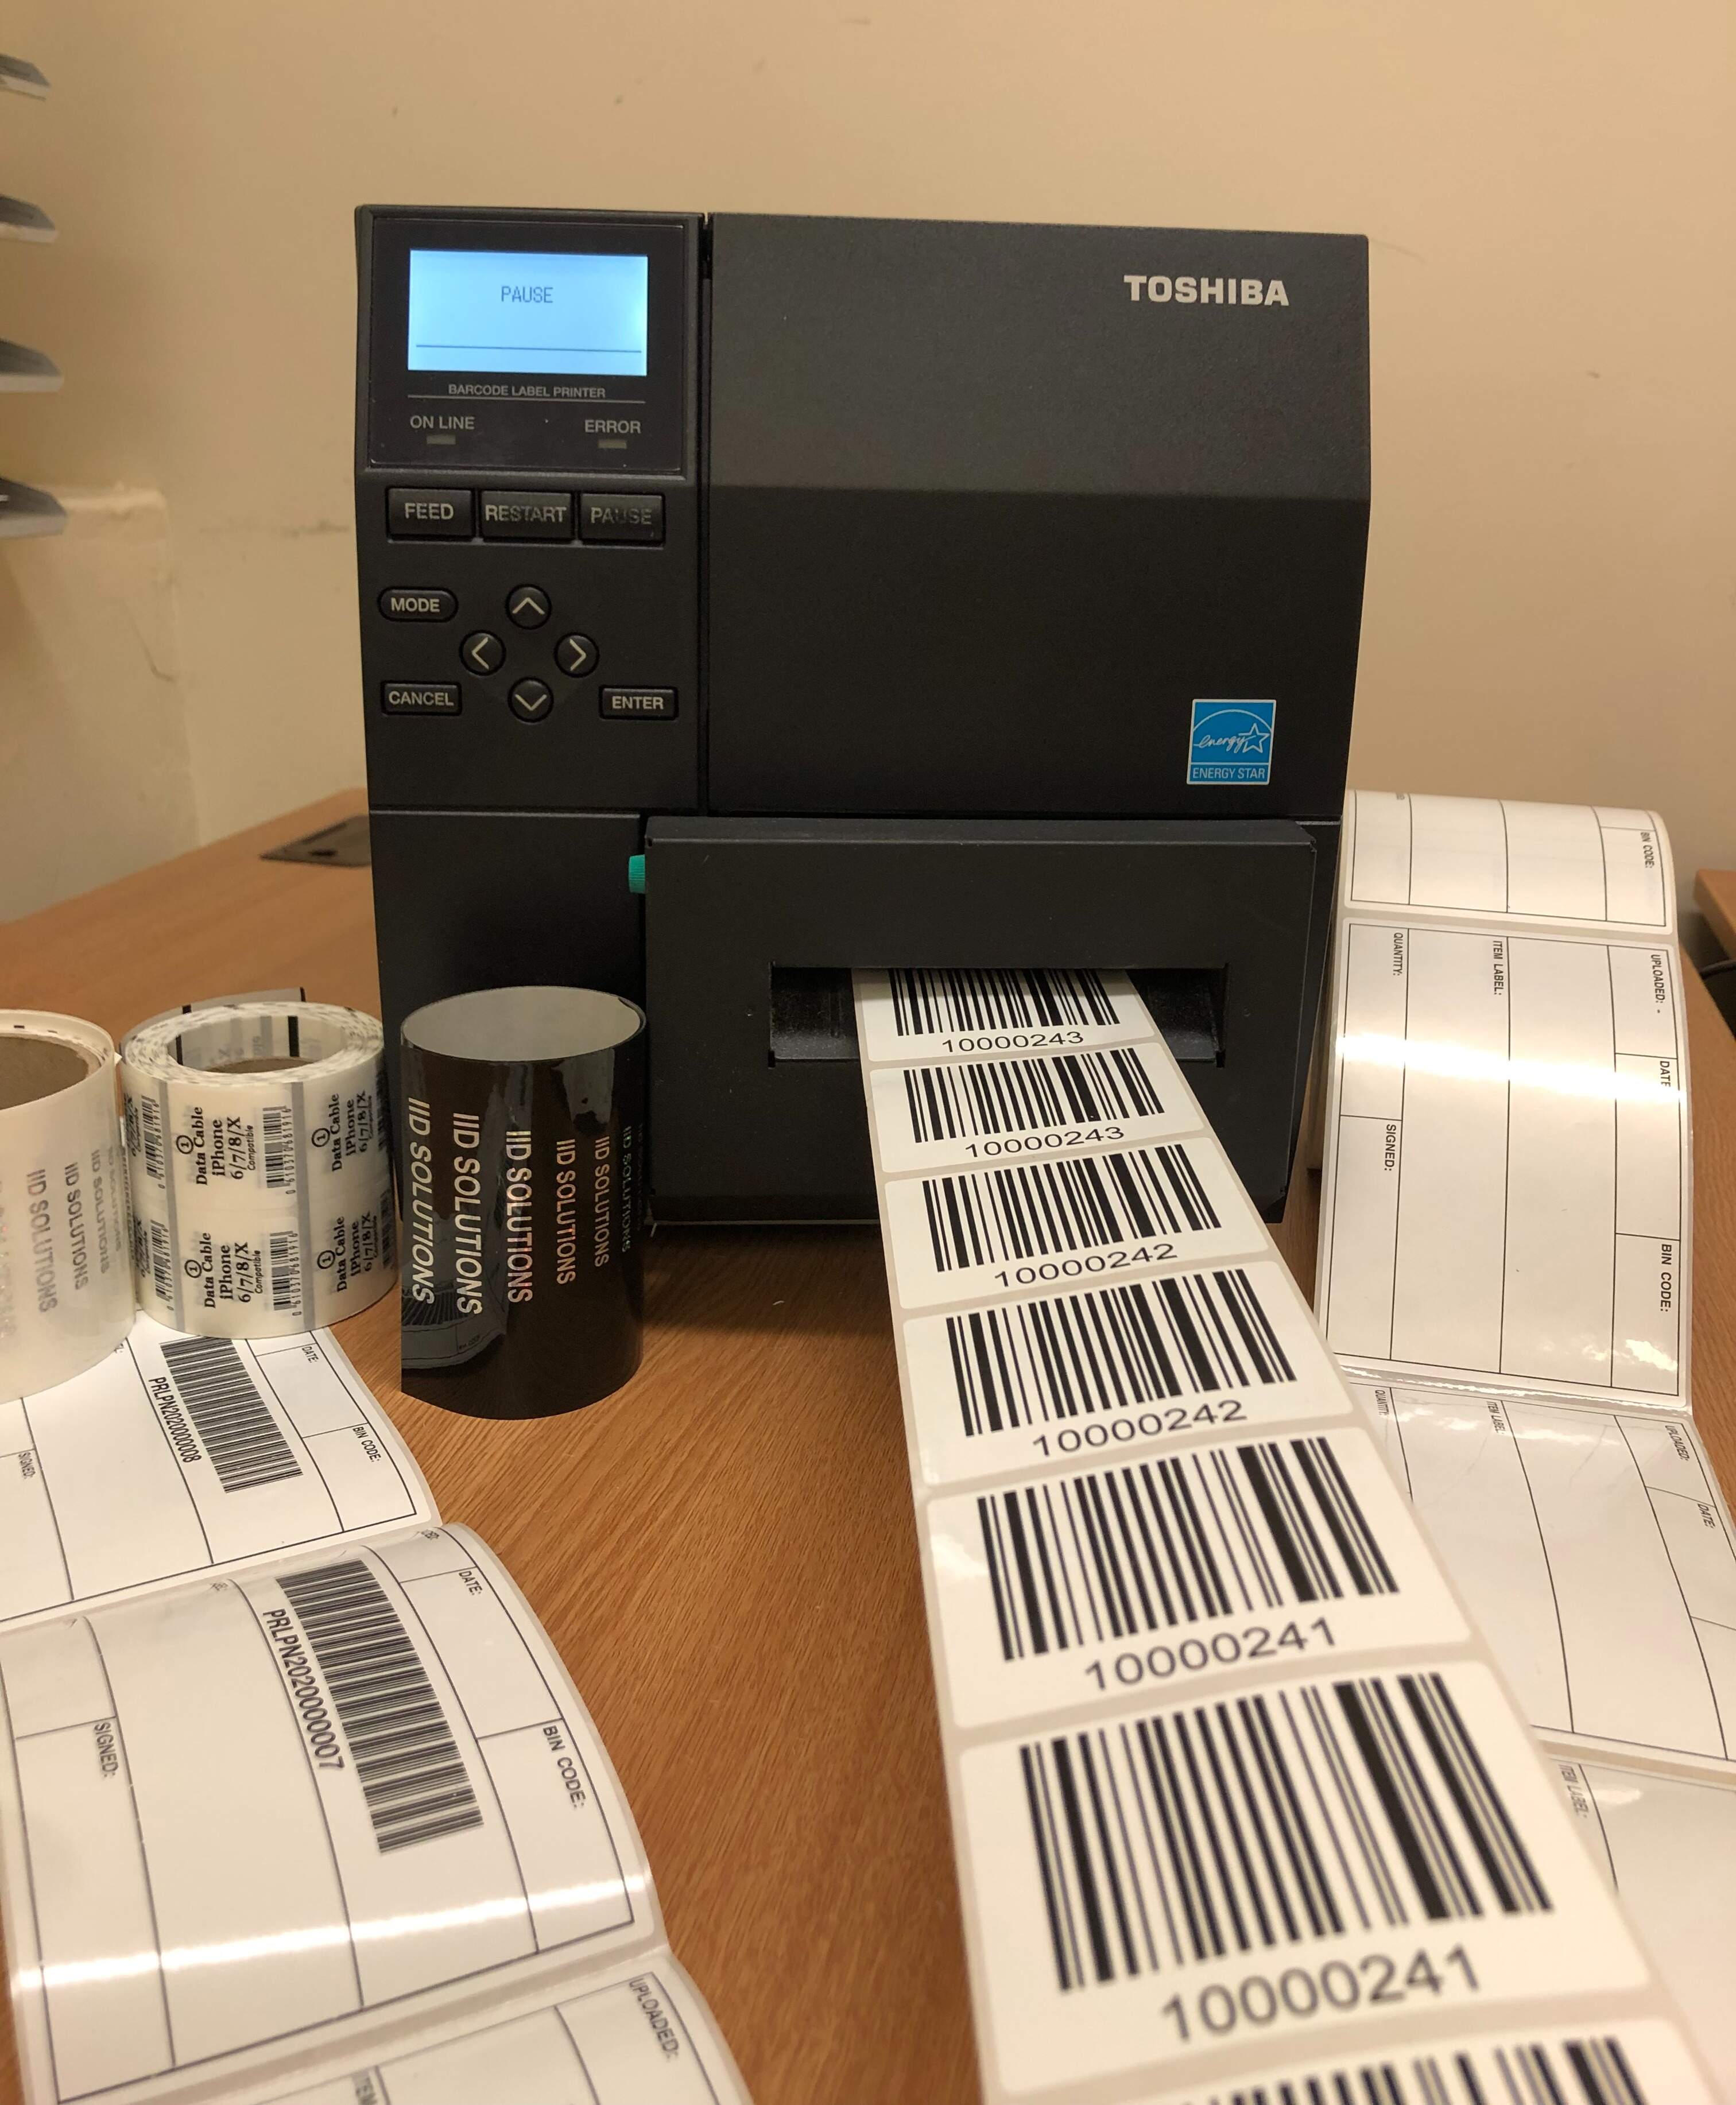 A thermal label printer printing urgent barcode labels with other rolls of printed labels by its side